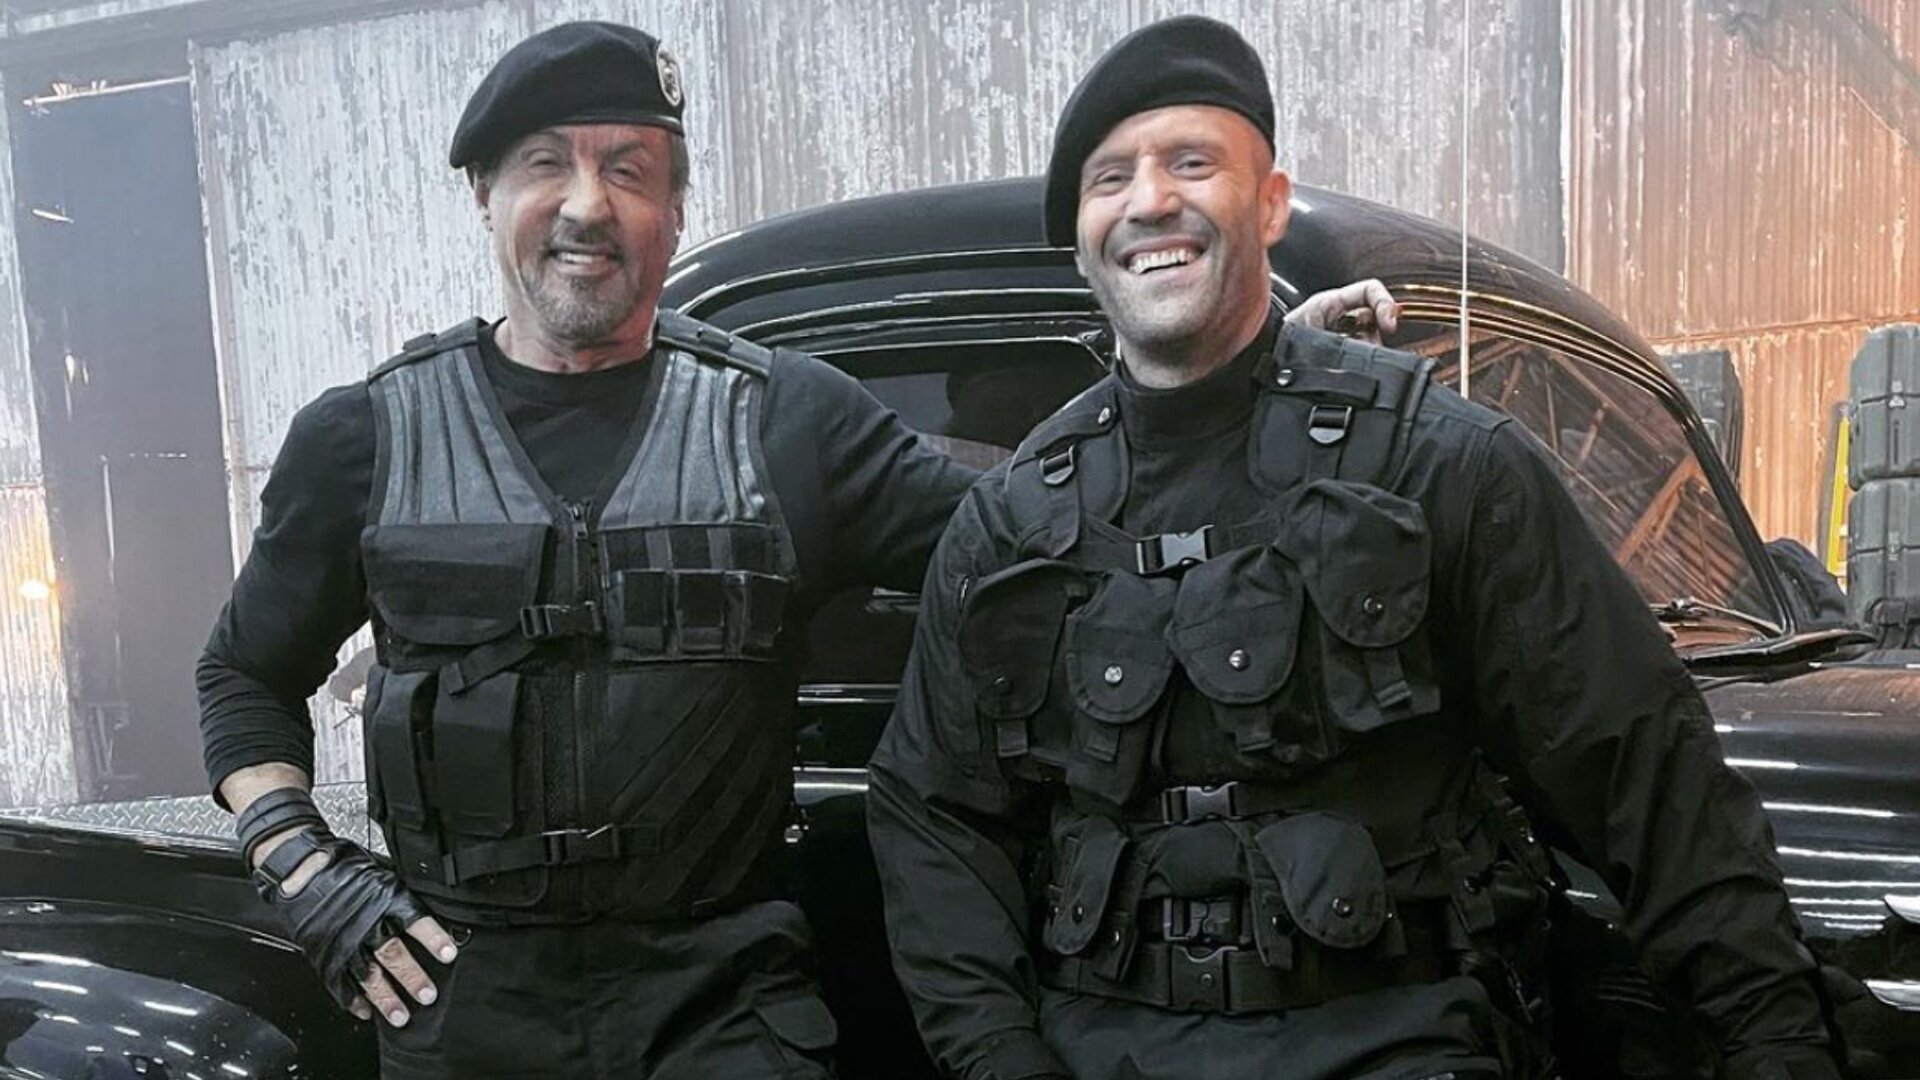 EXPENDABLE 4 Photos Give Us Our First Look At Sylvester Stallone and Jason Statham